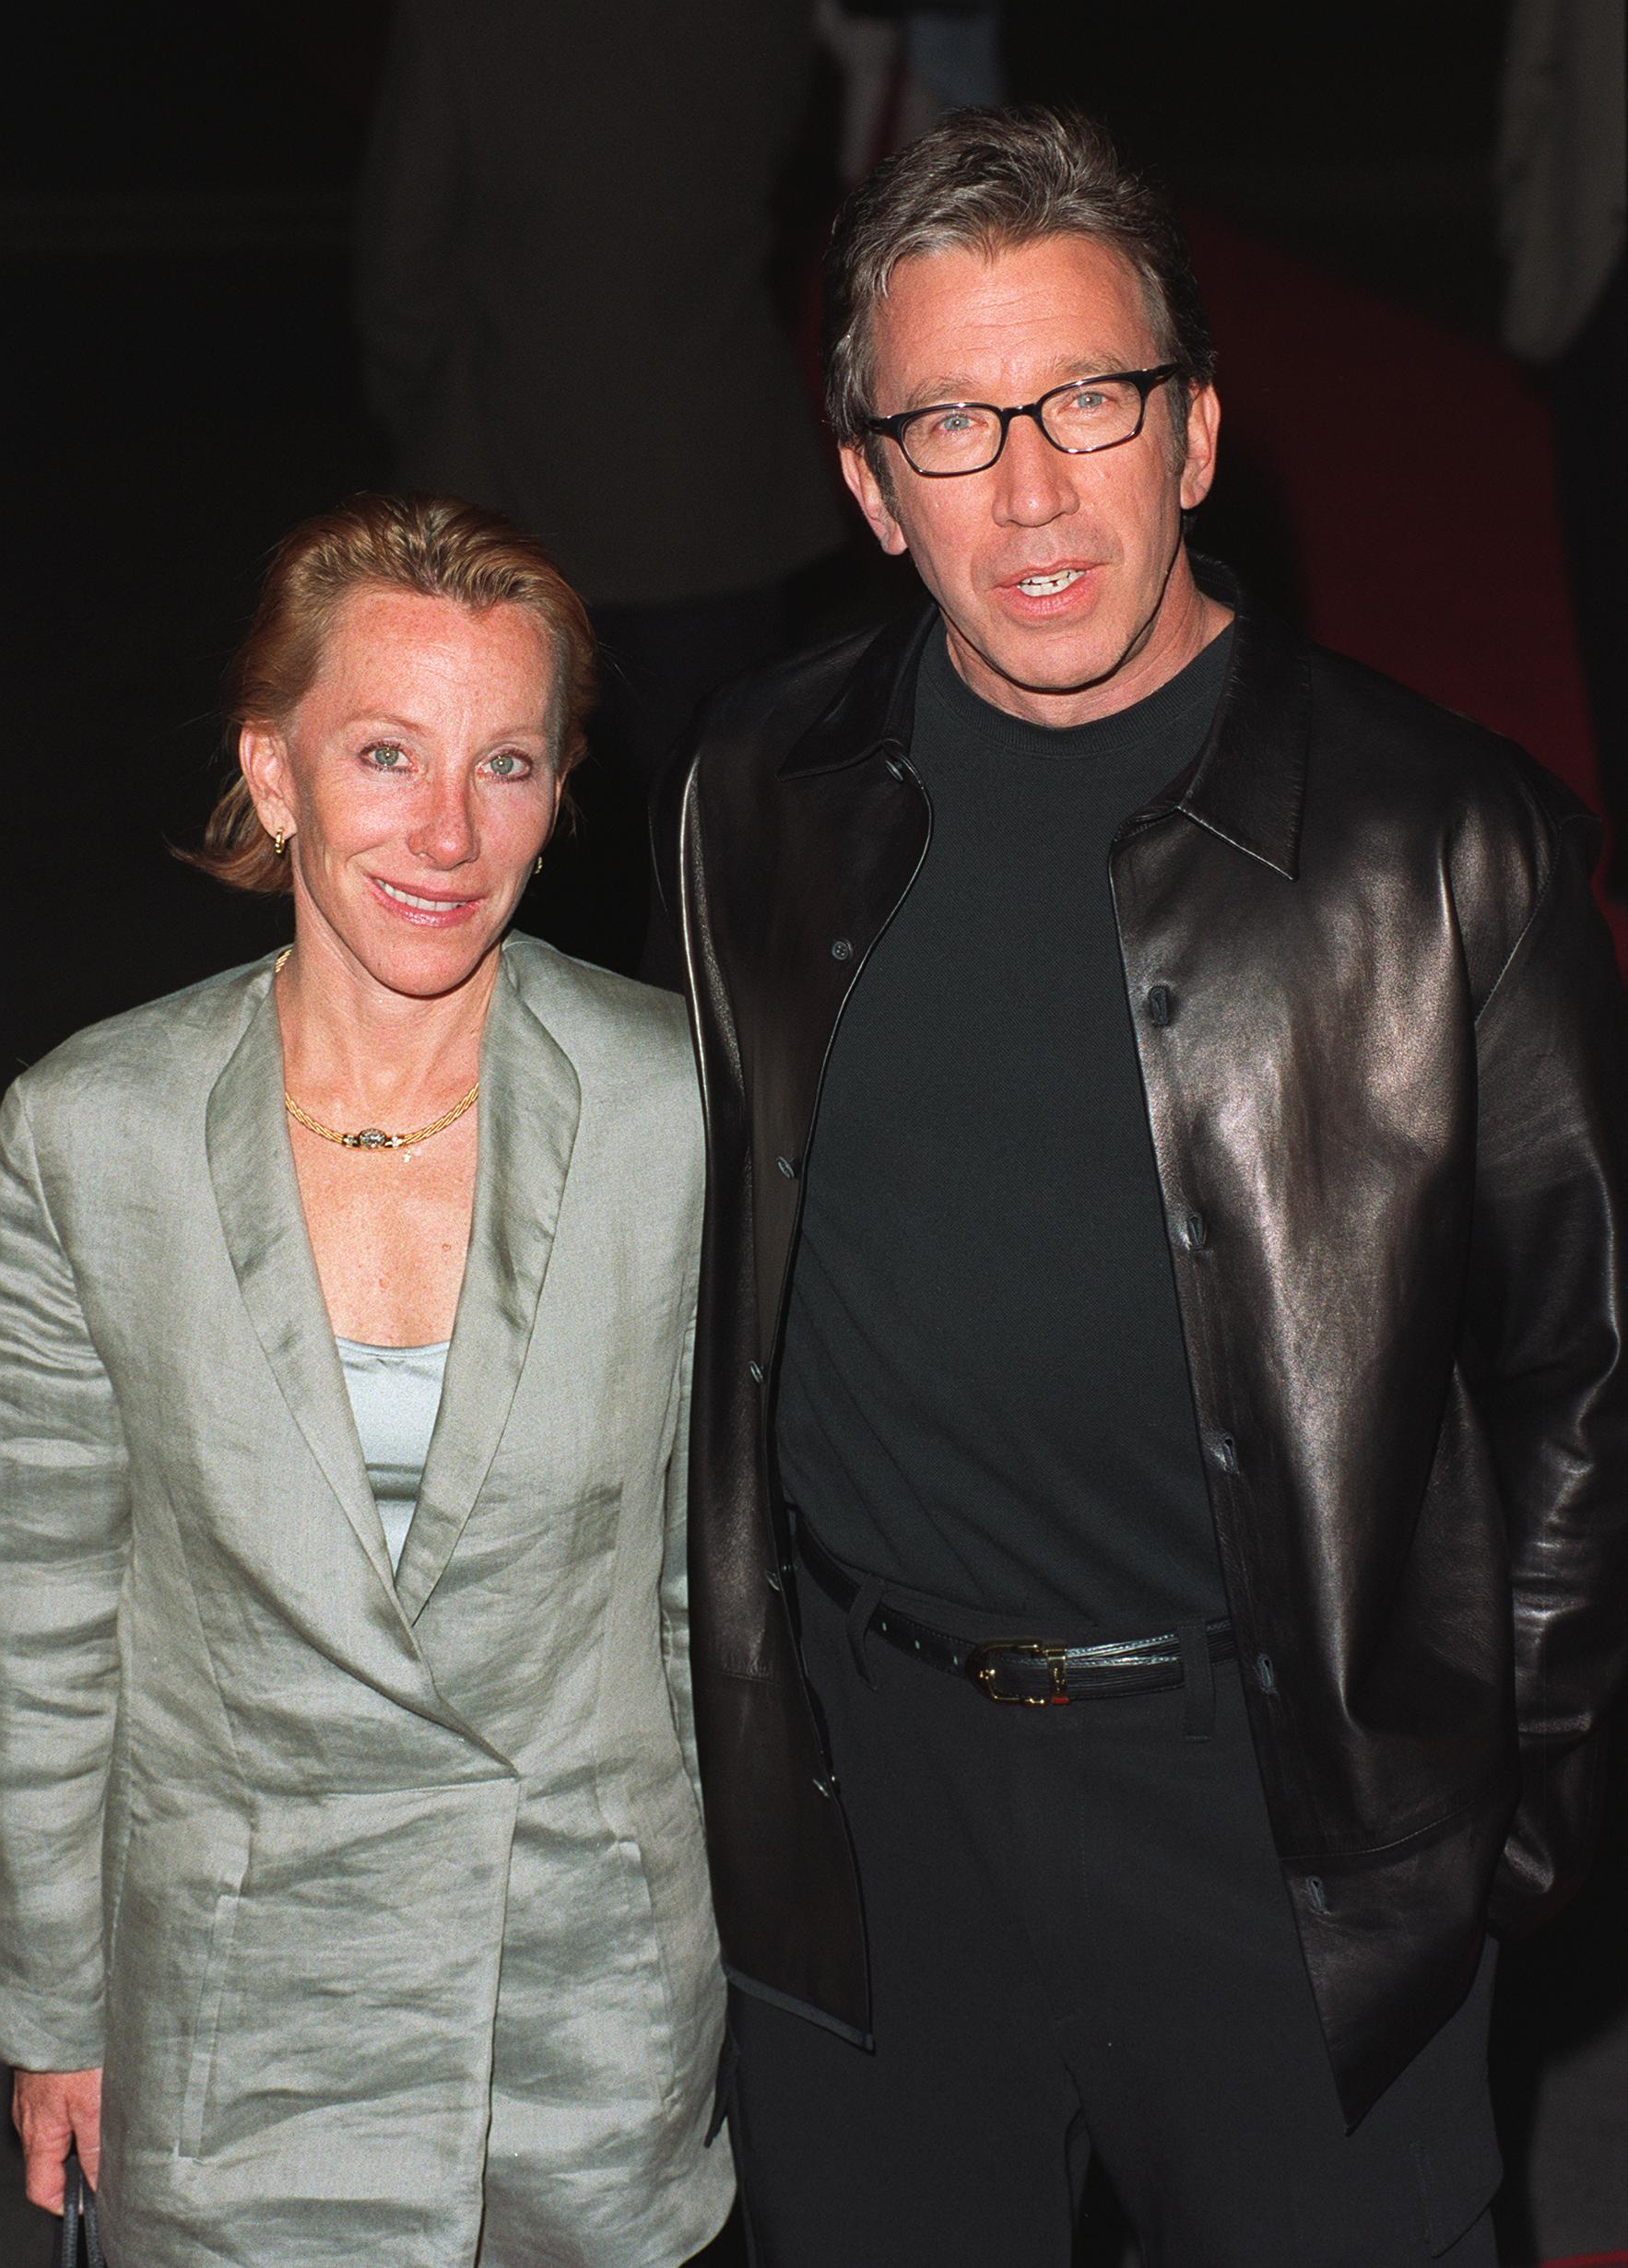 Jane Hajduk, Tim Allen's Wife 5 Fast Facts You Need to Know